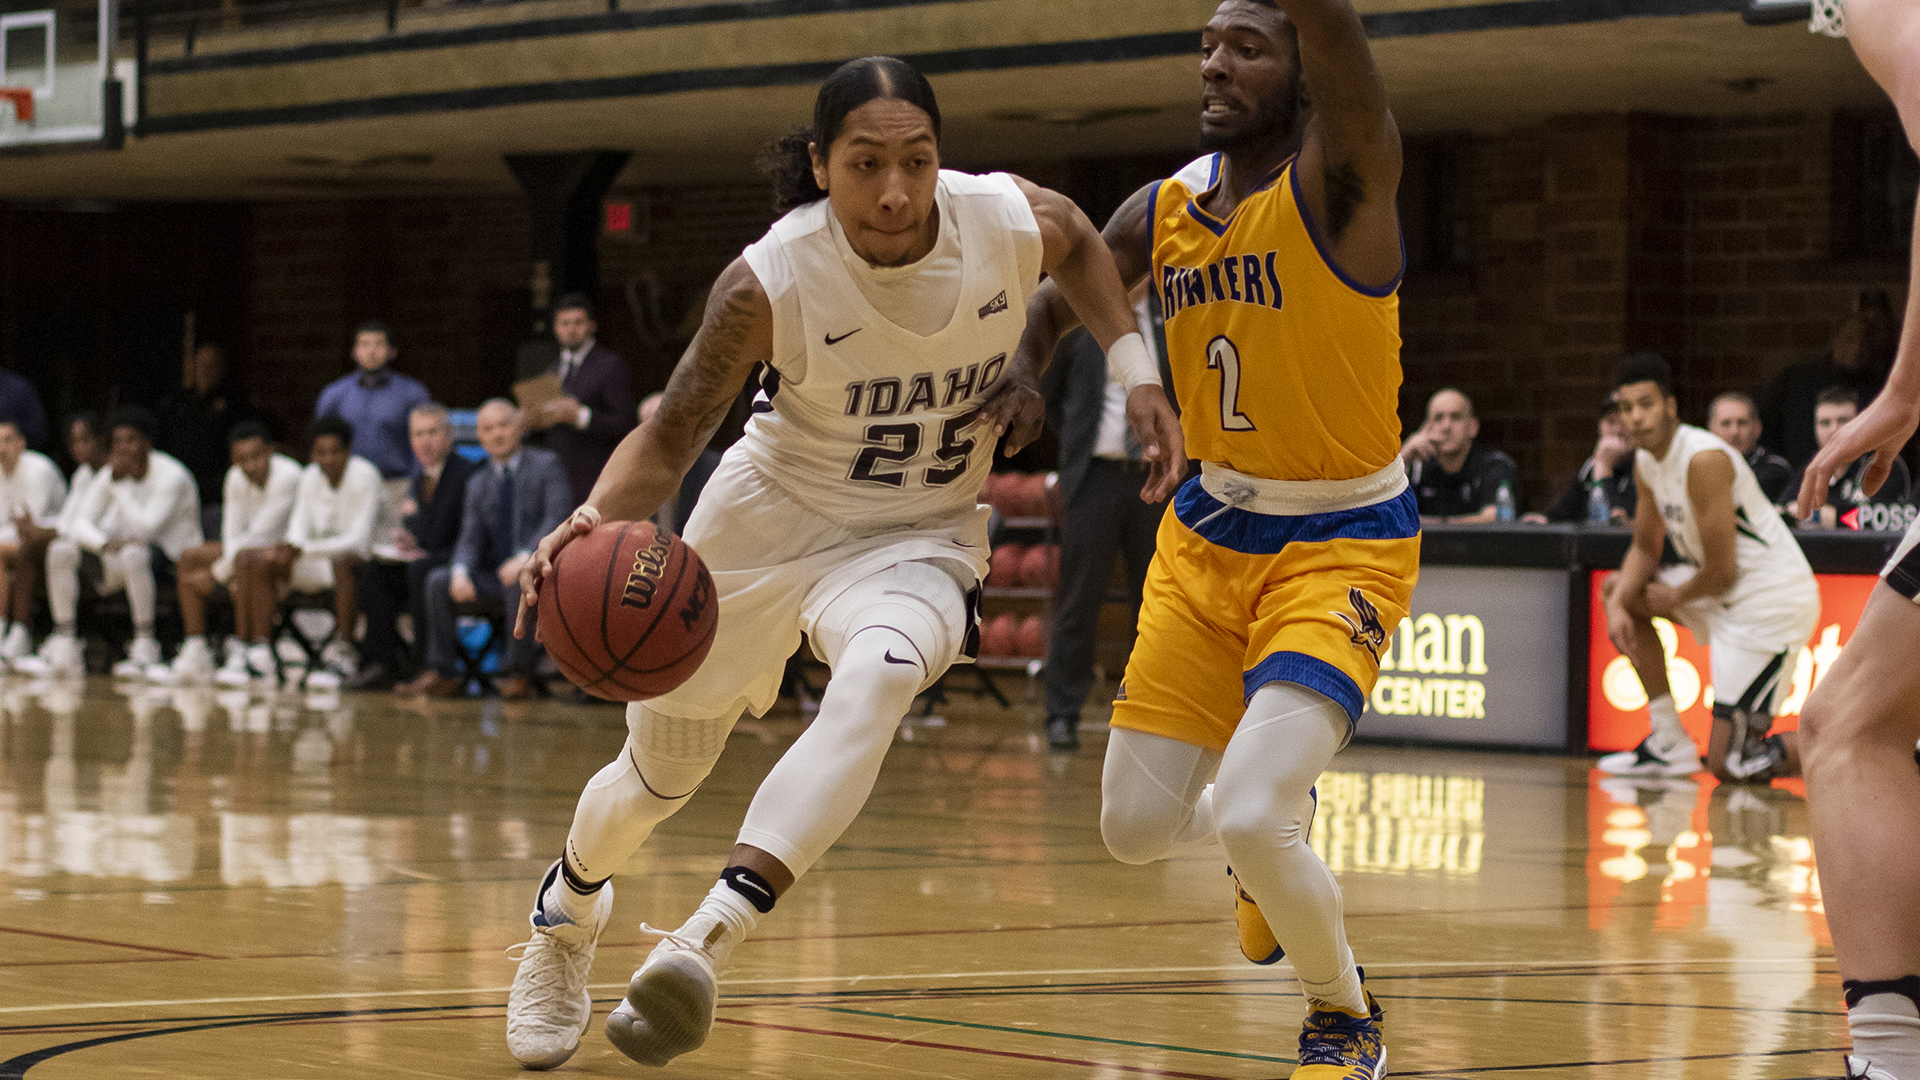 Trevon Allen (Umatilla) Finishes with 14 points, 7 rebounds but the Idaho men fall at Northern Colorado, 83-79